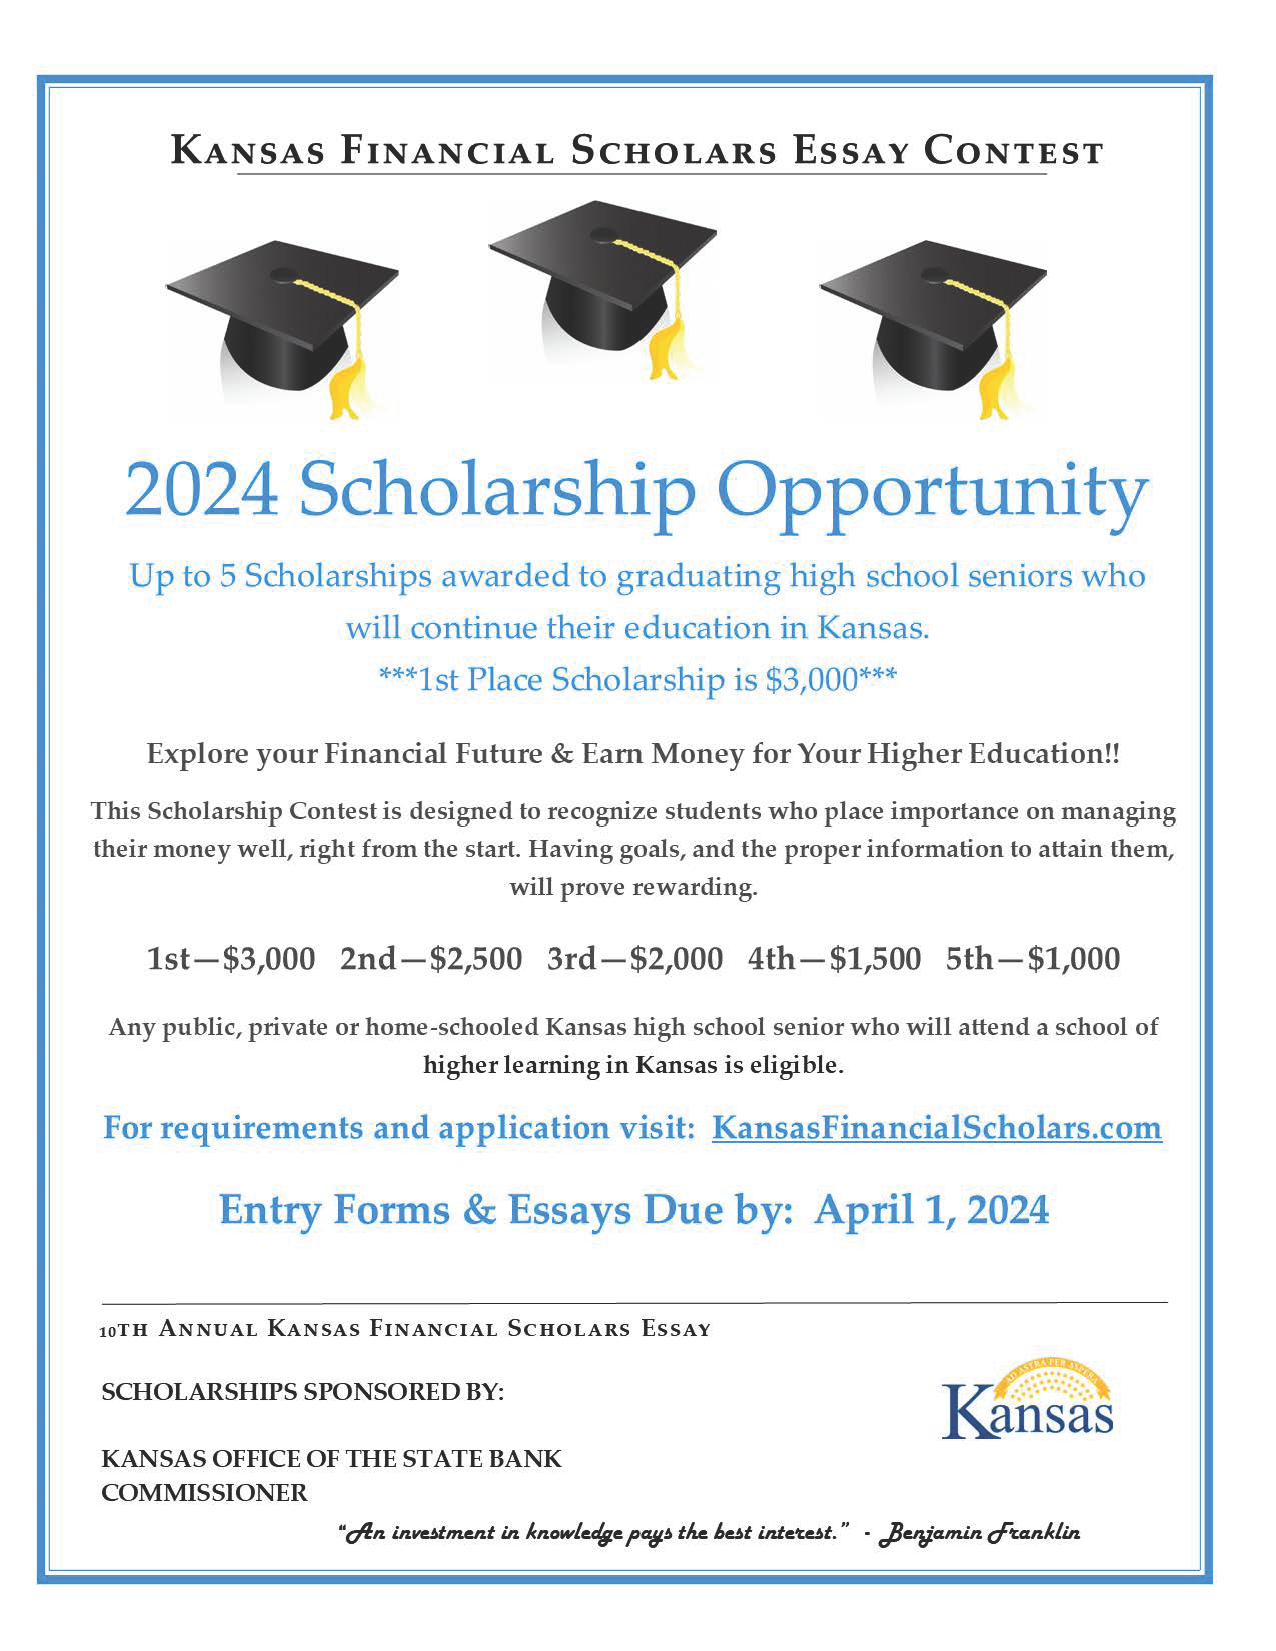 2024 Scholarship Contest Kansas Office of the State Bank Commissioner